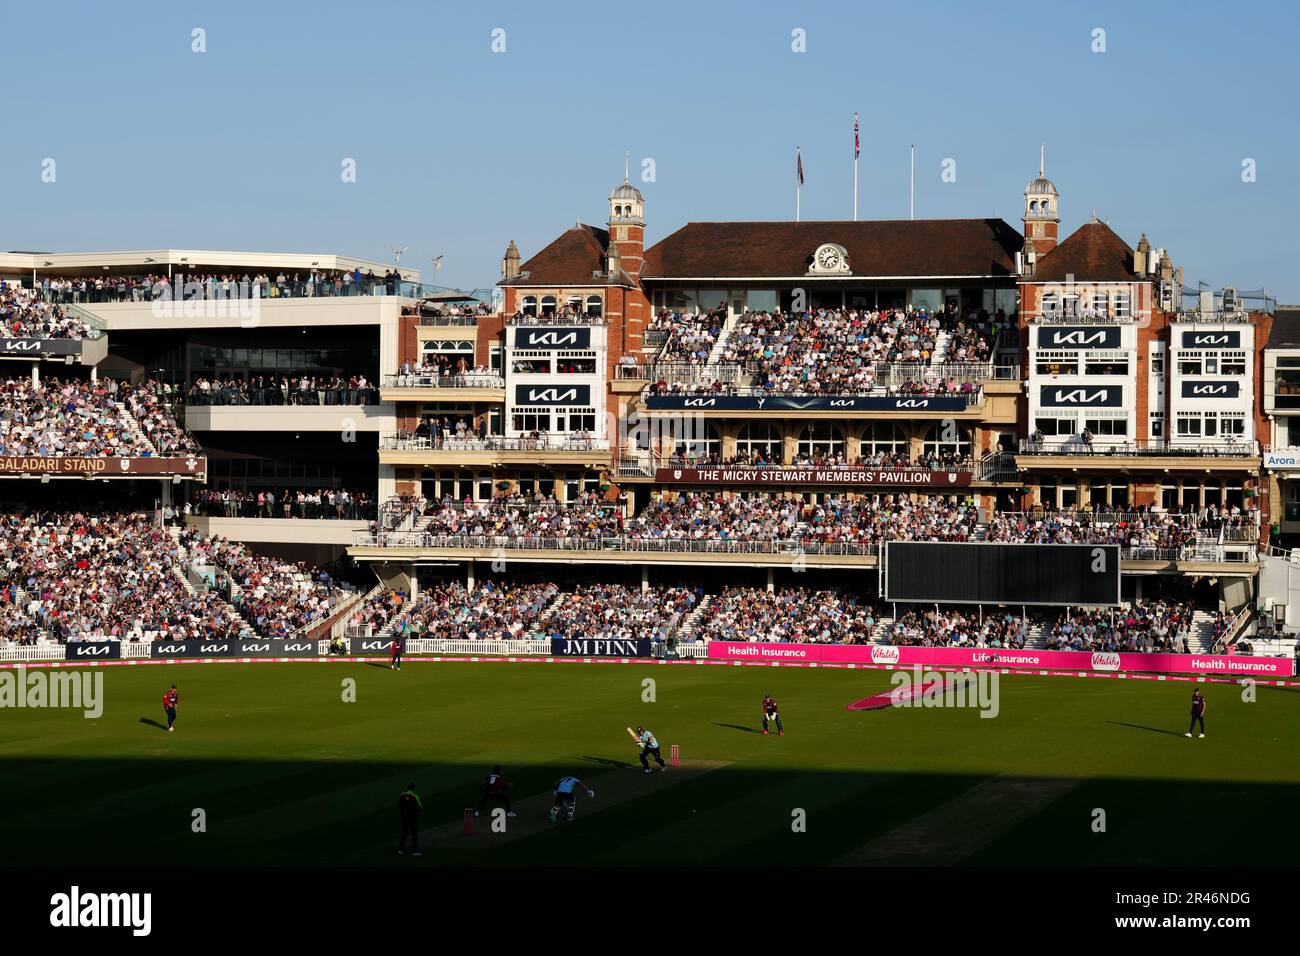 Surrey’s Jamie Smith hits out on his way to a score of 17 during the Vitality Blast T20 match at the Kia Oval, London Picture date: Friday May 26, 2022. Stock Photo